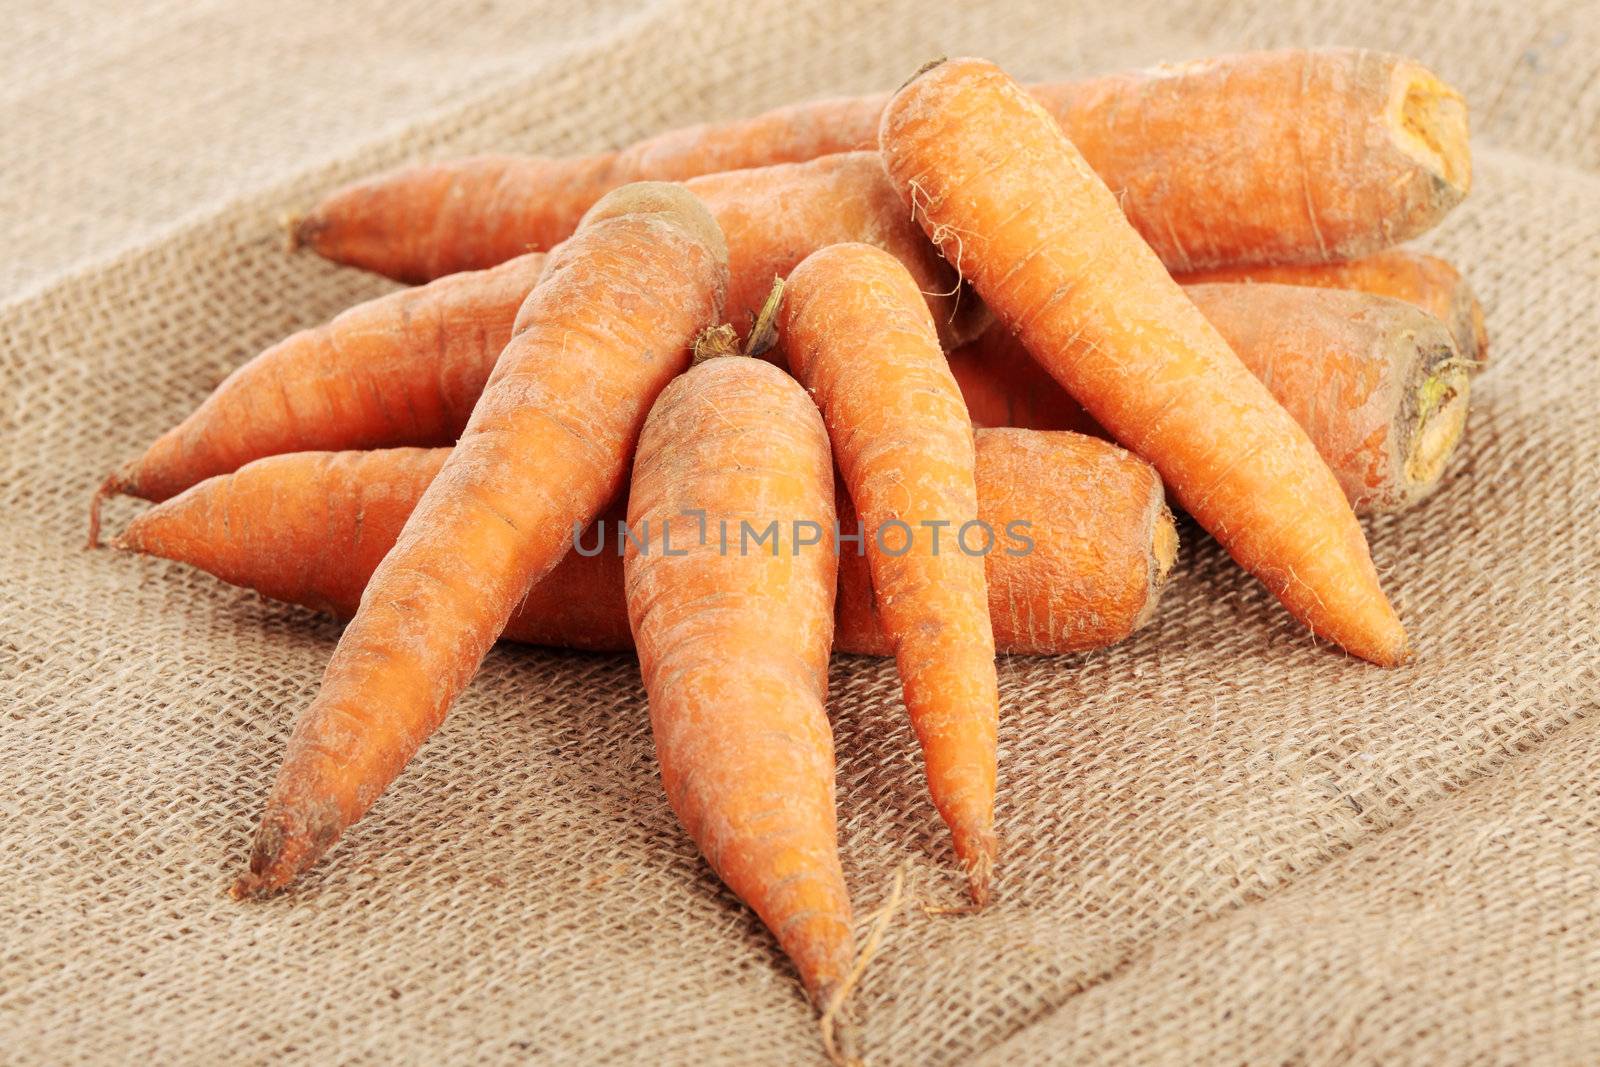 Carrots by BDS